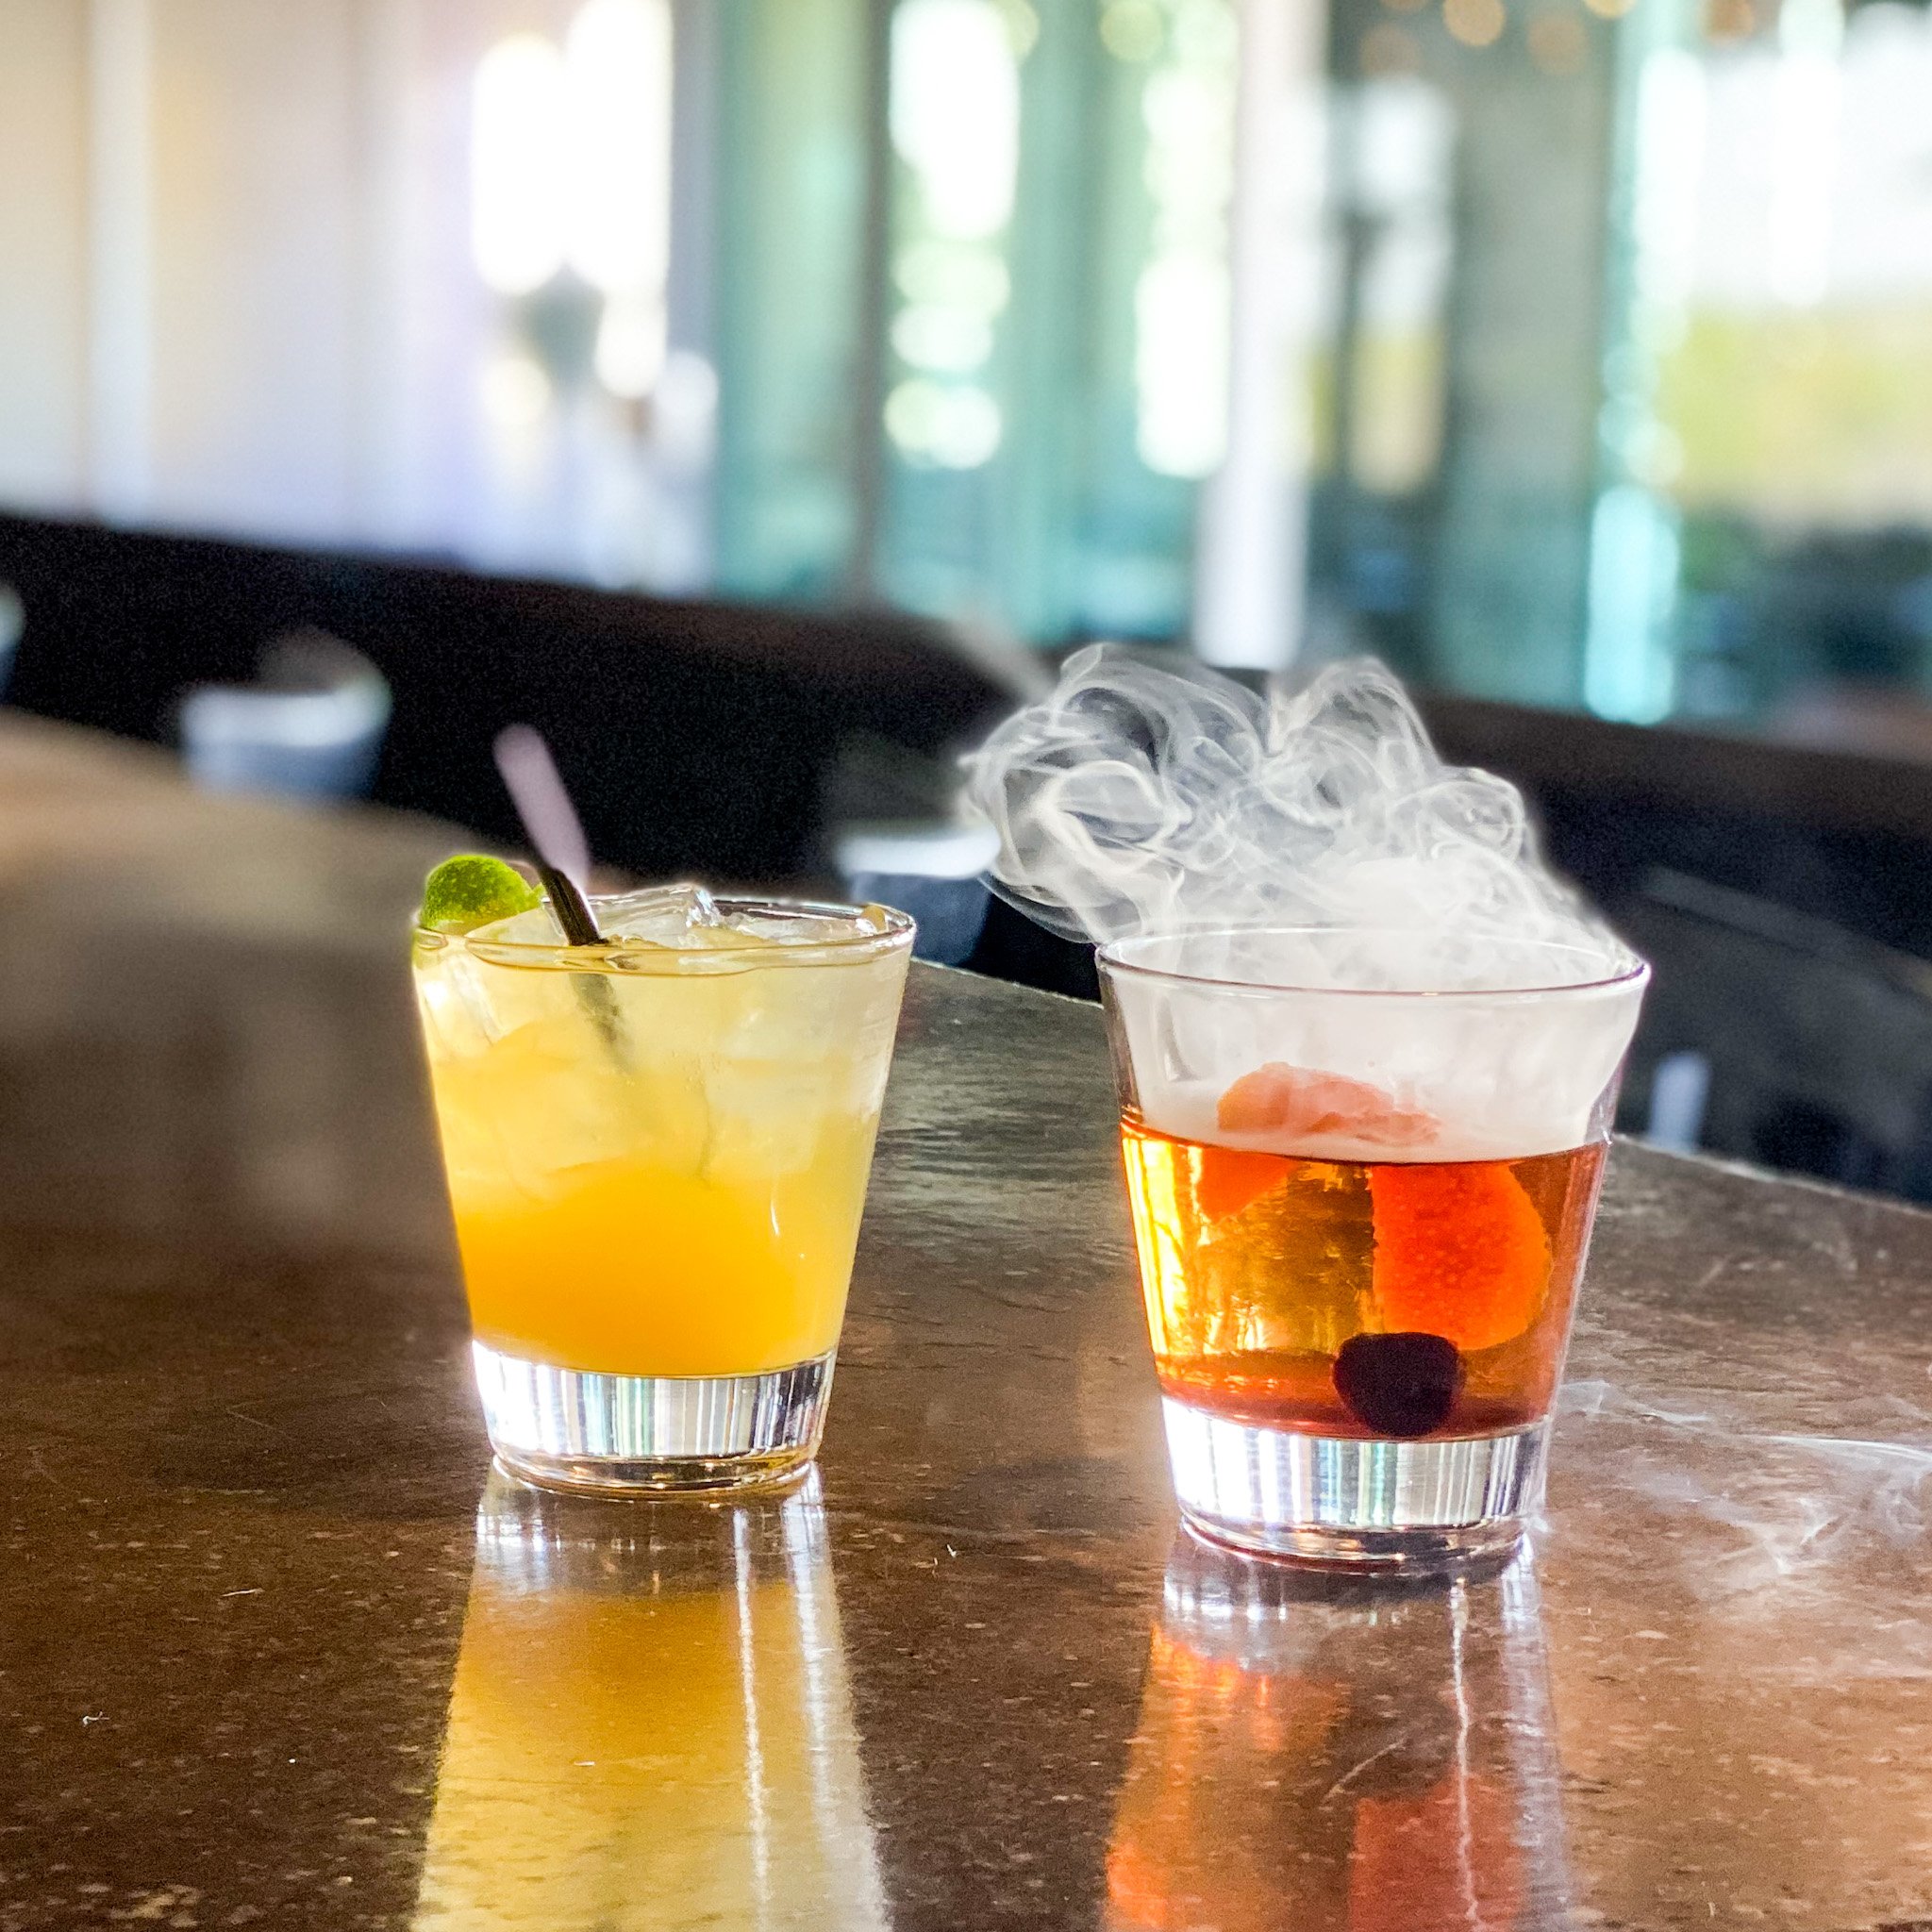 Double tap if you're a whiskey 🥃 lover and love a good Smoked Old Fashioned. Double tap if you're enjoying the mocktail trend and can't wait to try our Mocktail Red Bull Rush 🍹

Cheers to Happy Hour! See you soon. 

Join us for Happy Hour from 3pm 